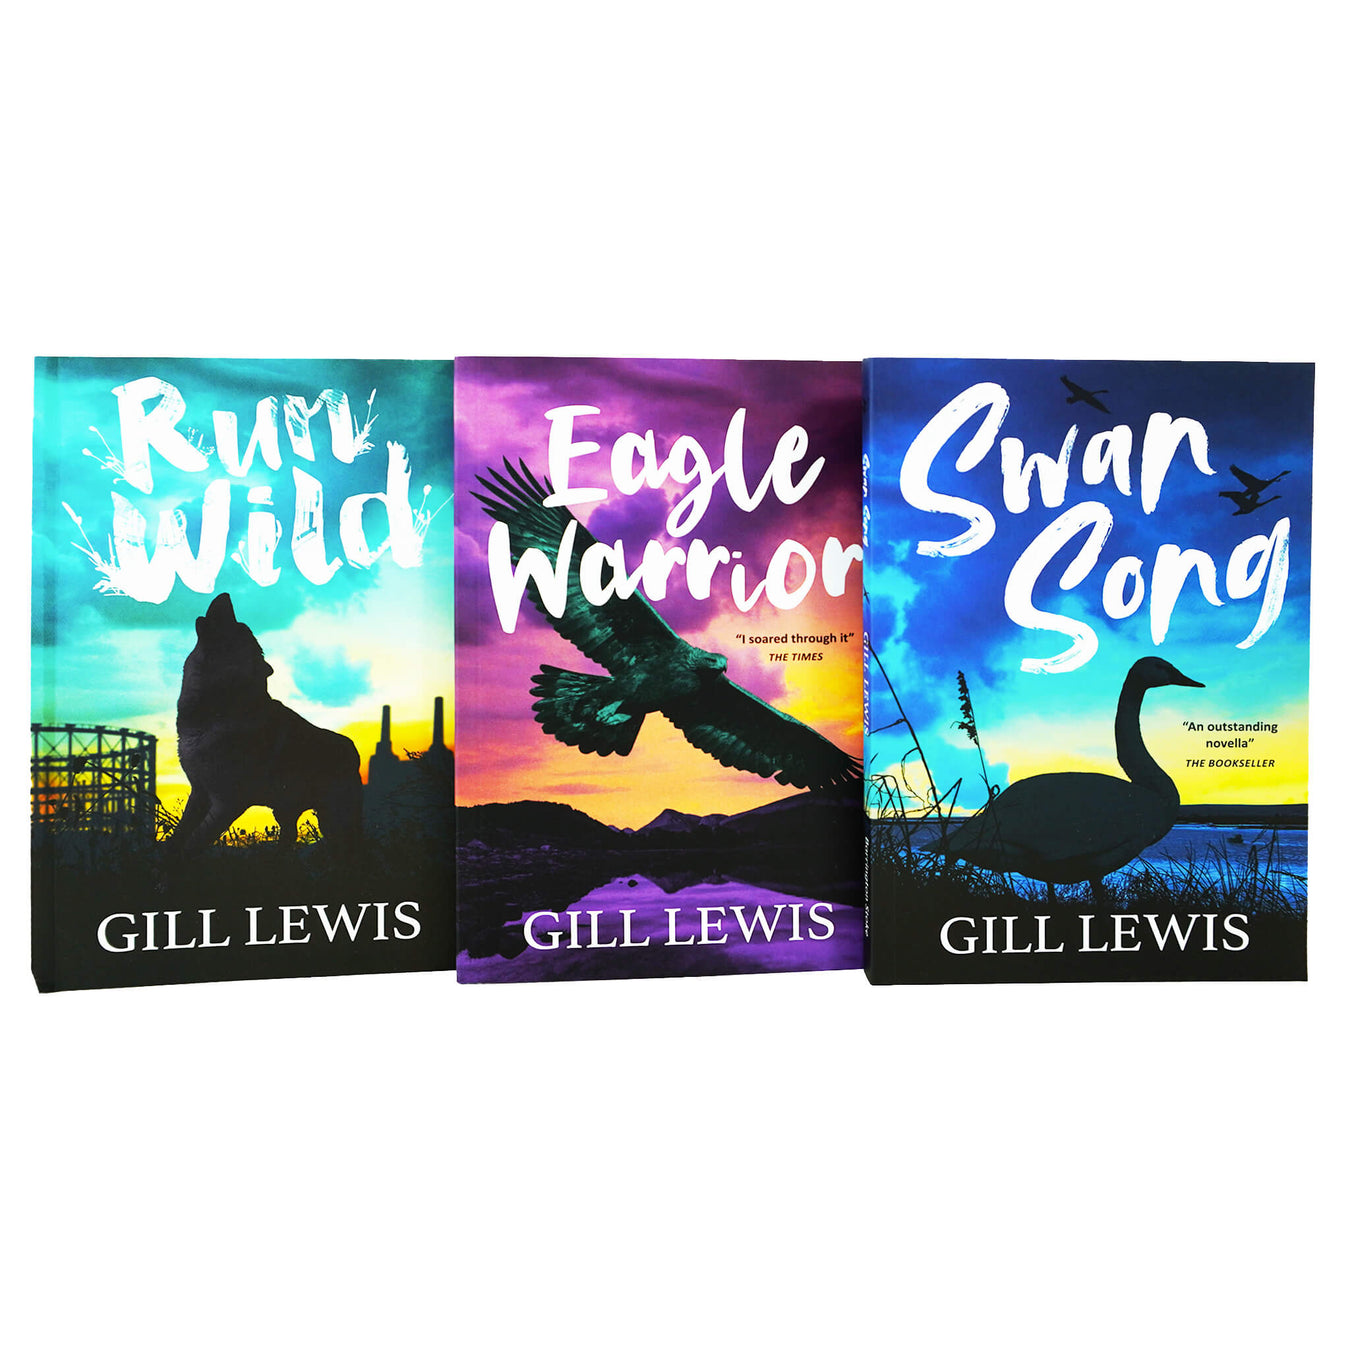 Gill Lewis 3 Books Collection Set (Run Wild, Eagle Warrior & Swan Song) - Ages 8-12 - Paperback 9-14 Barrington Stoke Ltd